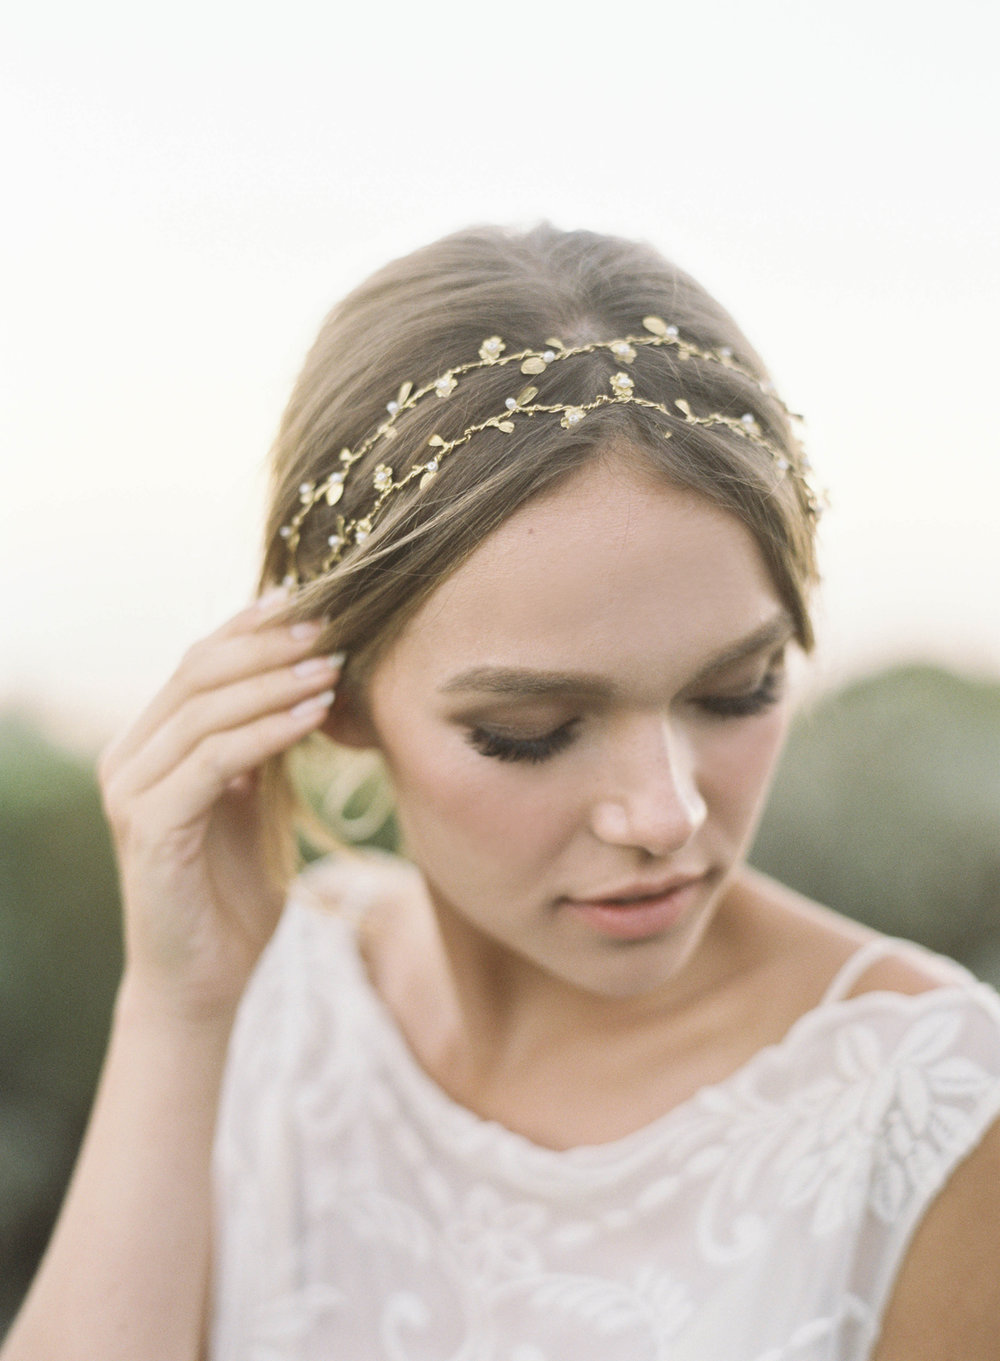 Forever everyone’s favorite hair vine,   Matilda   - subtly feminine and floral. Offered in gold, silver and rose gold with tiny pearl or crystal accents! Farm house wedding ready but also not too sweet for our city gals craving something floral!